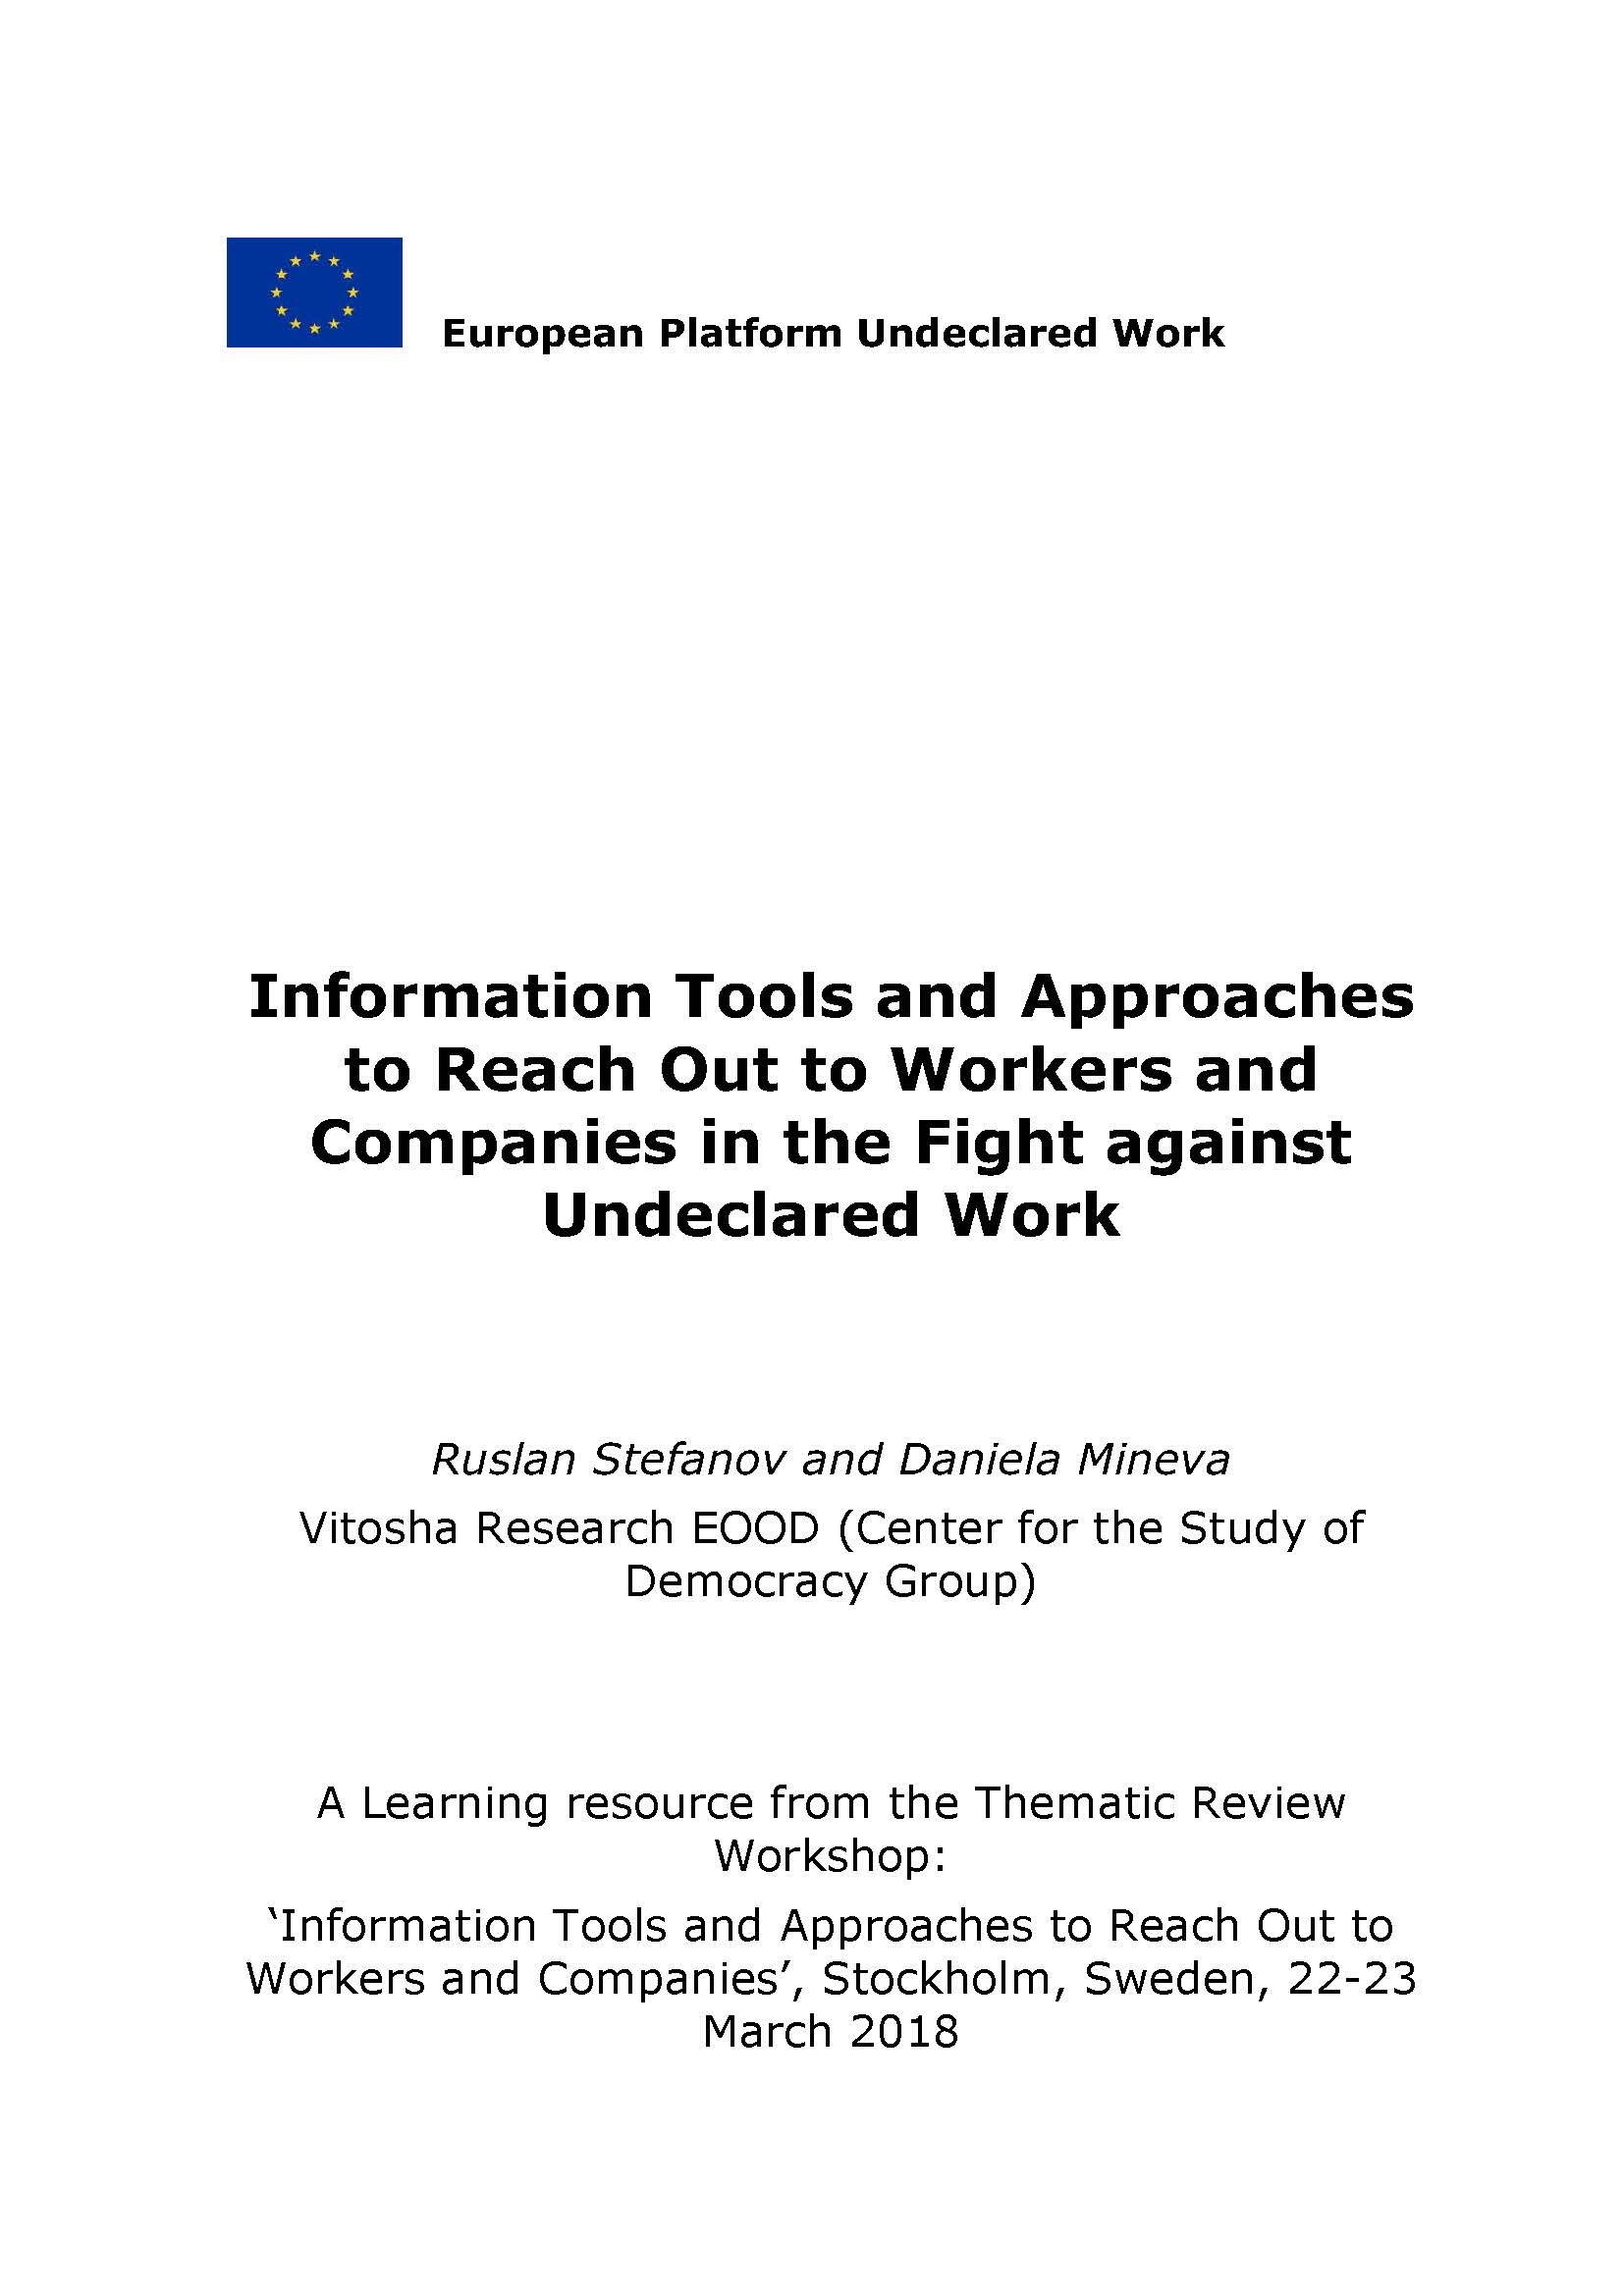 Information Tools and Approaches to Reach Out to Workers and Companies in the Fight against Undeclared Work